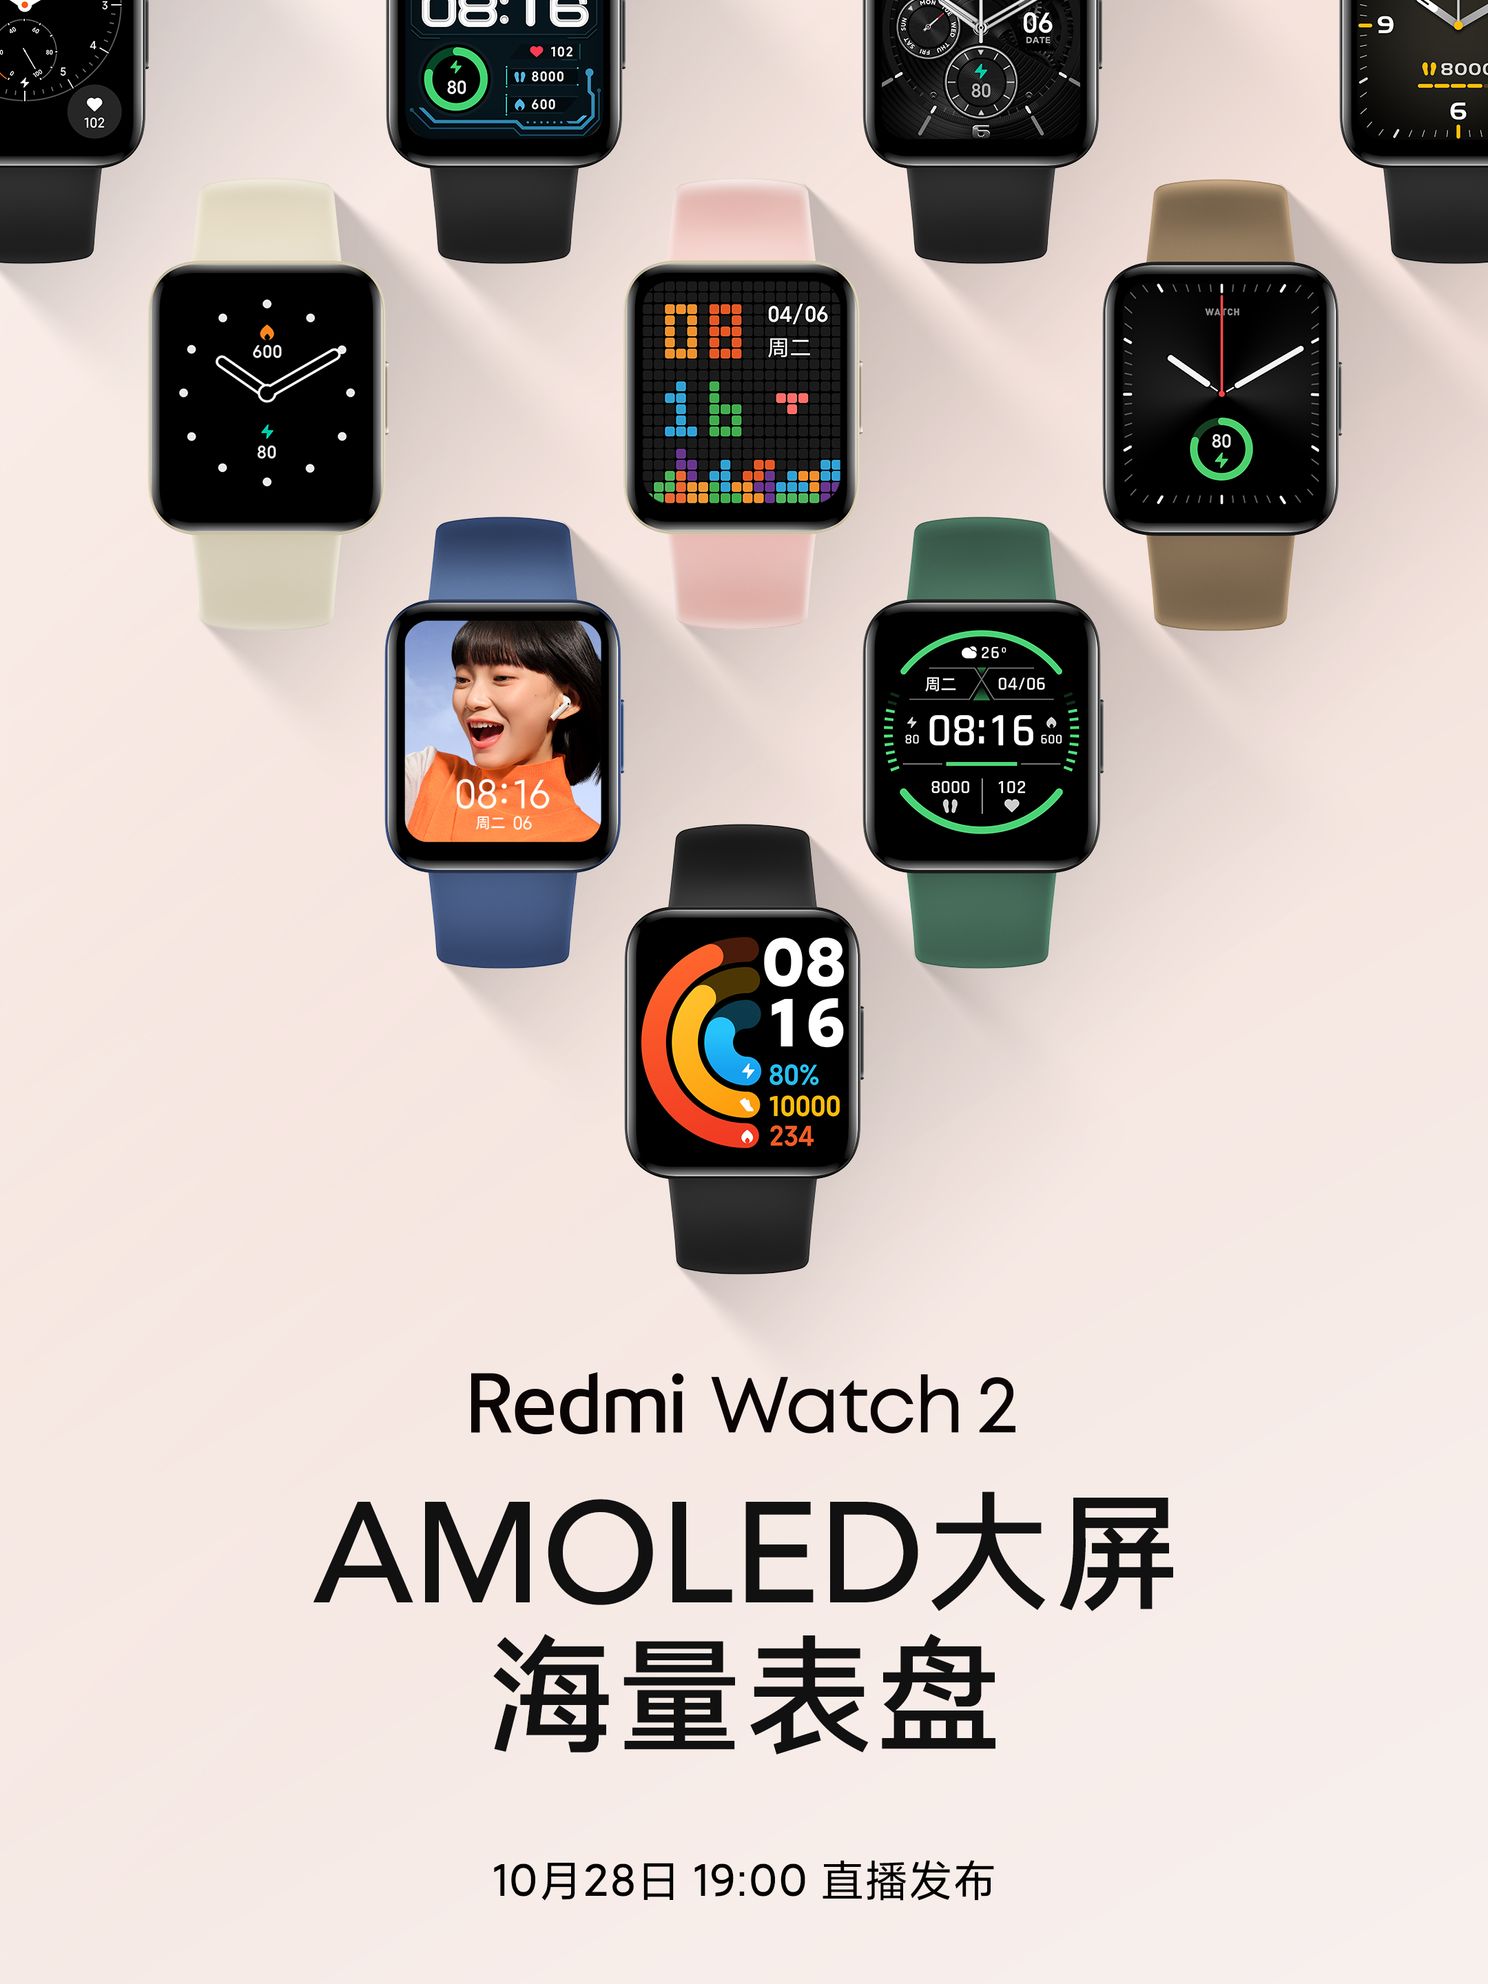 Redmi Smart Band Pro seen in all its glory in images